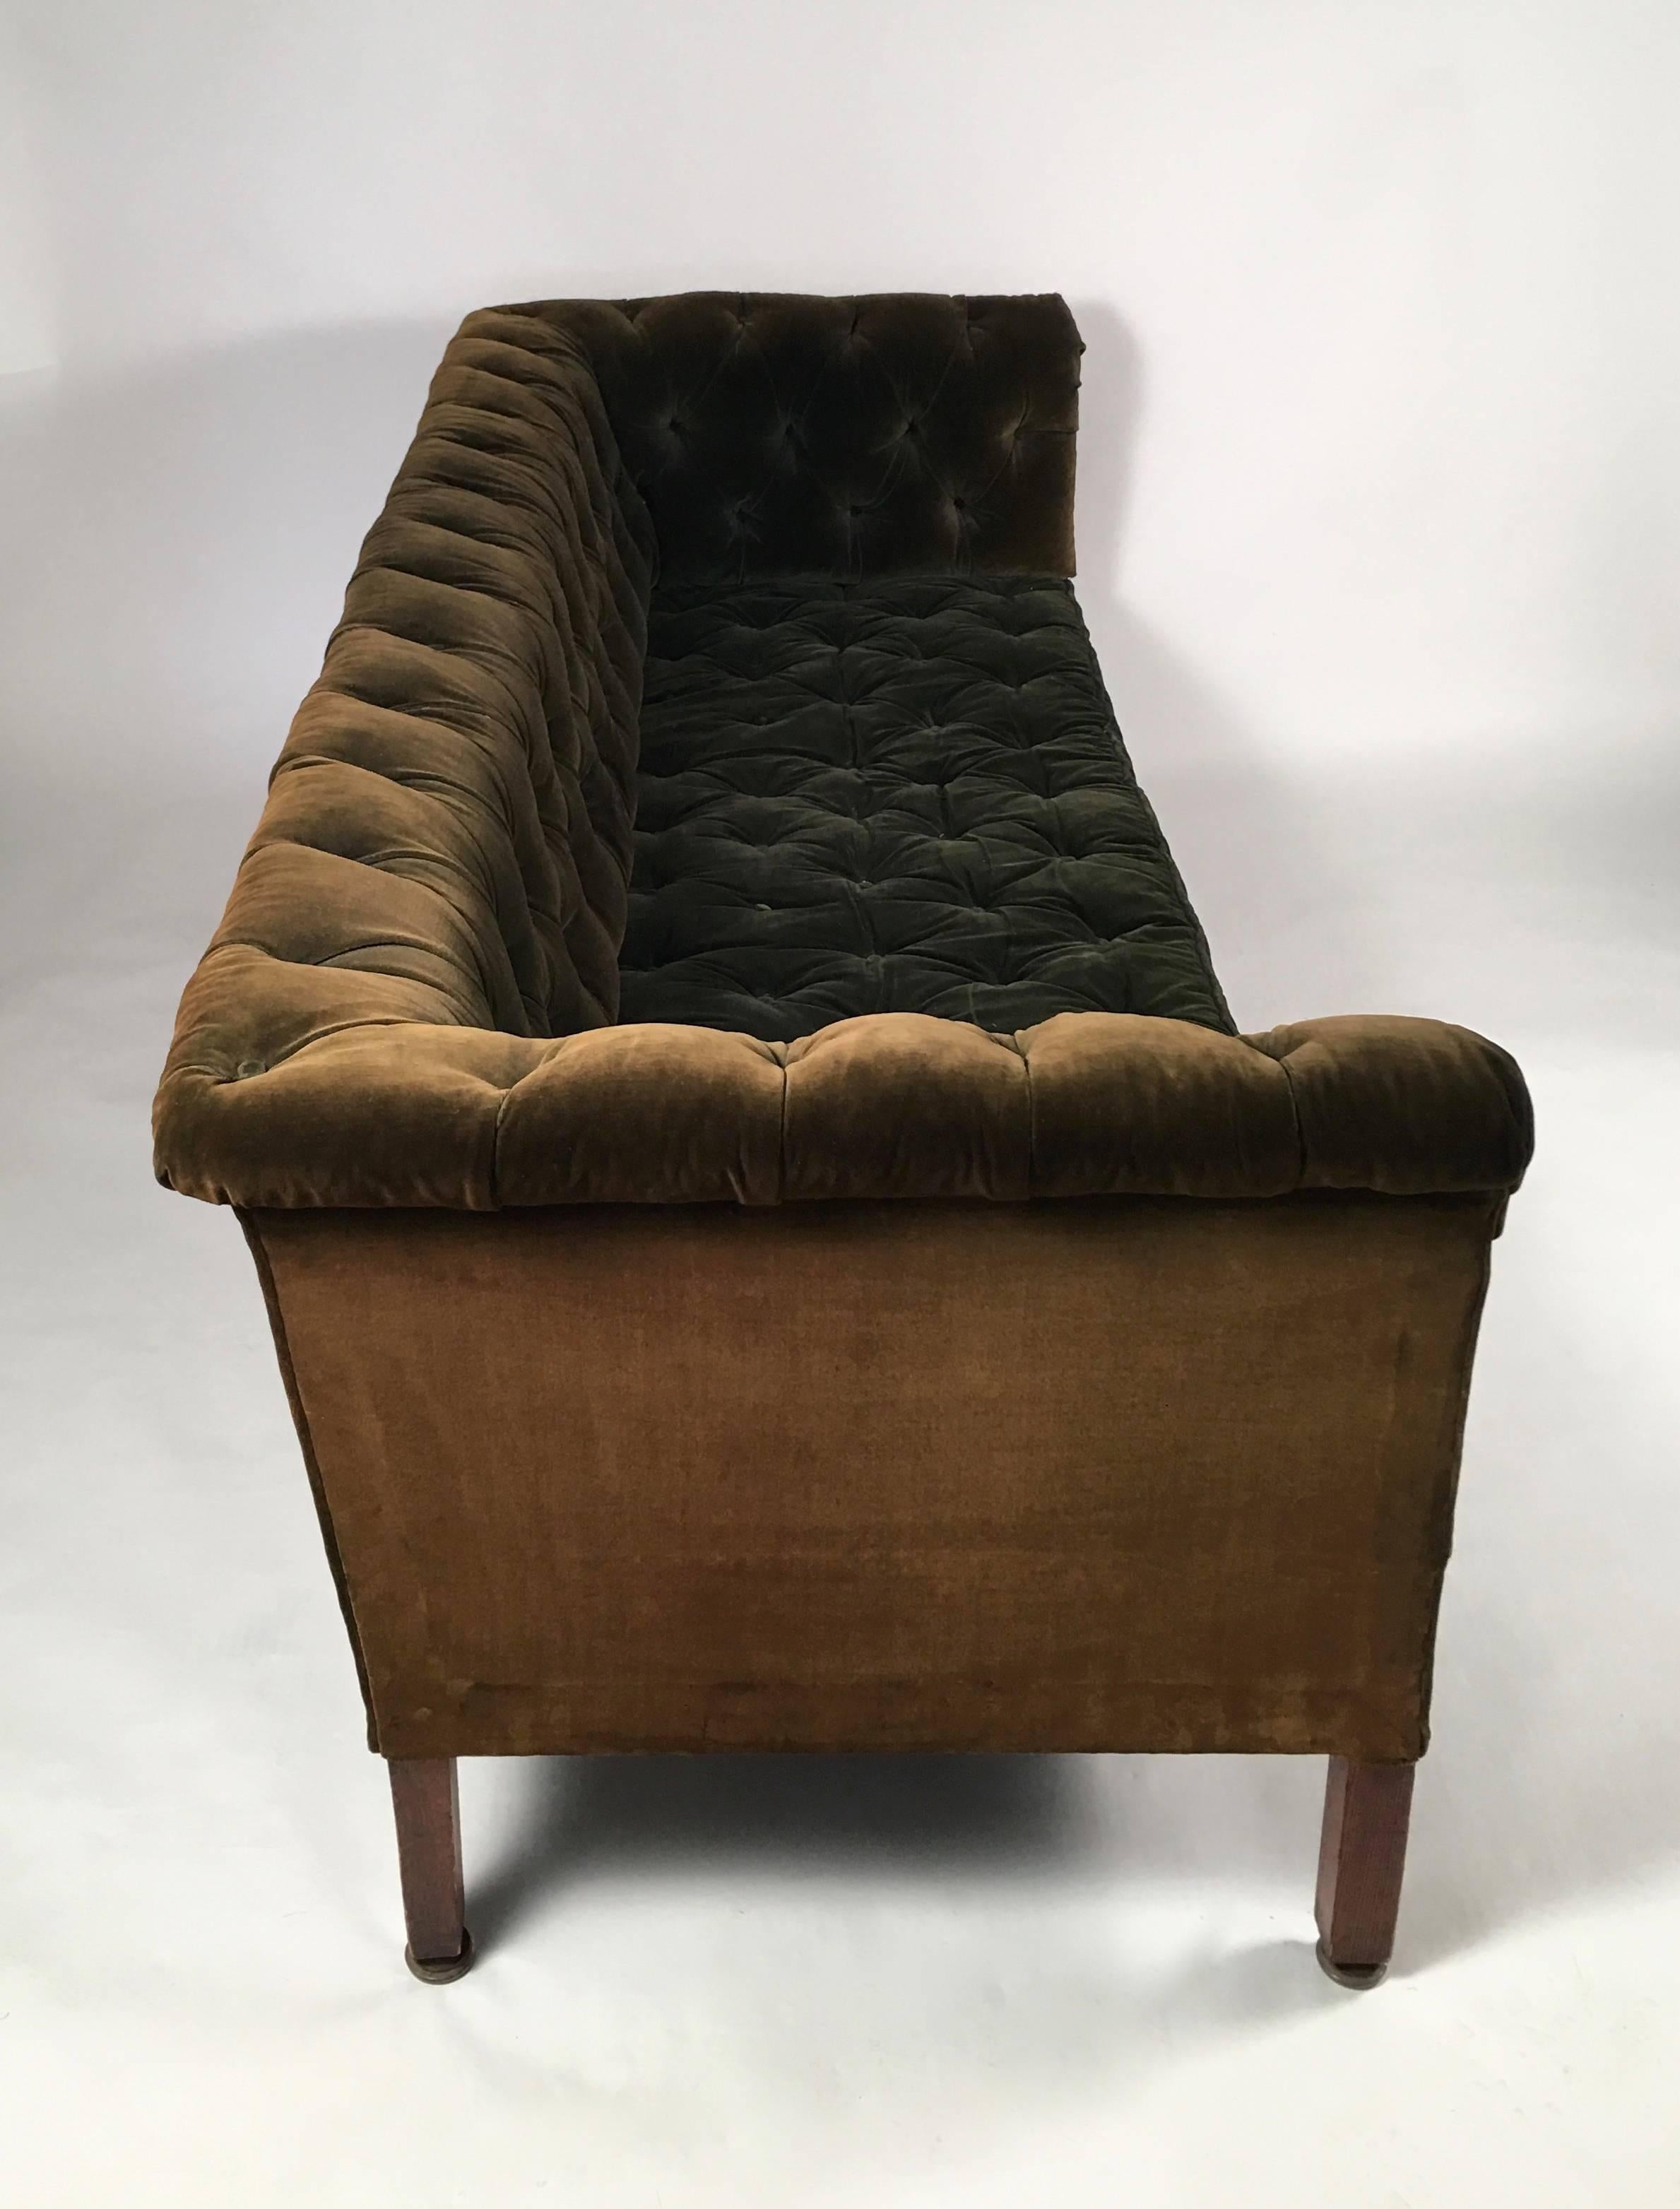 A 19th century forest green velvet Chesterfield sofa of rectangular form, the gifted back, seats and sides supported by four square-section oak legs, circa 1880s.

Provenance: Historic New England (formerly The Society for the Preservation of New